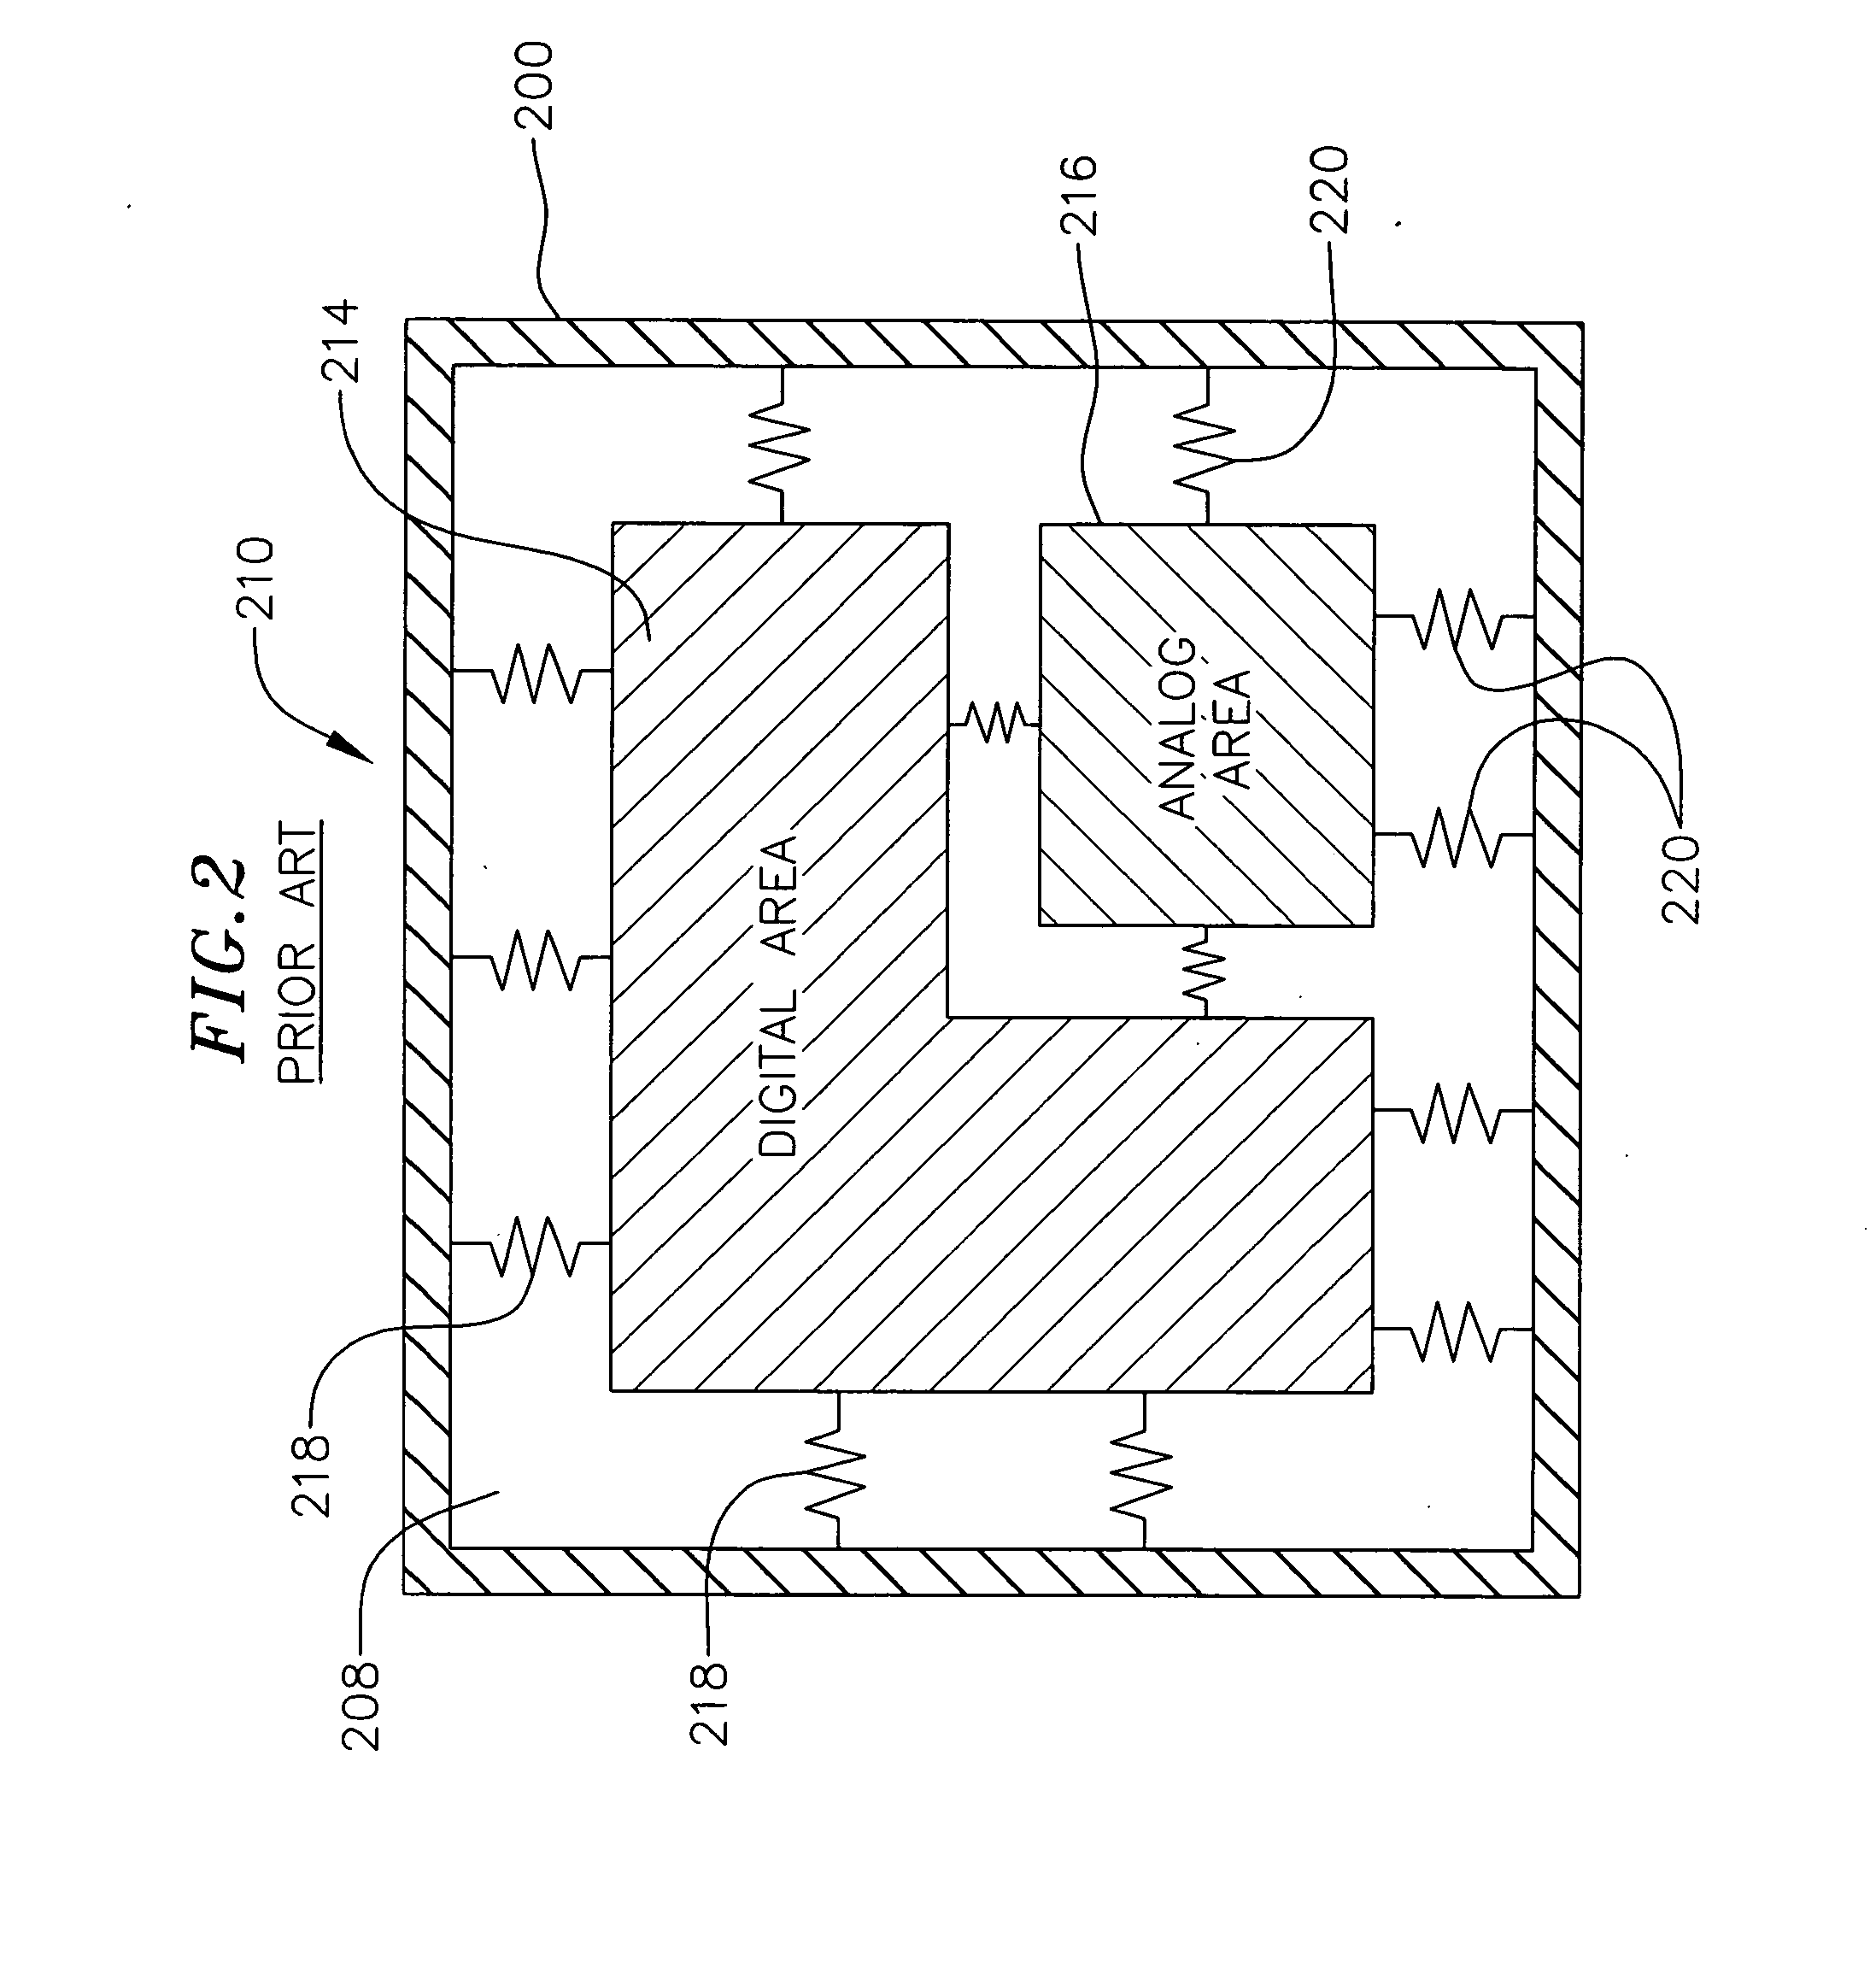 Seal ring for integrated circuits